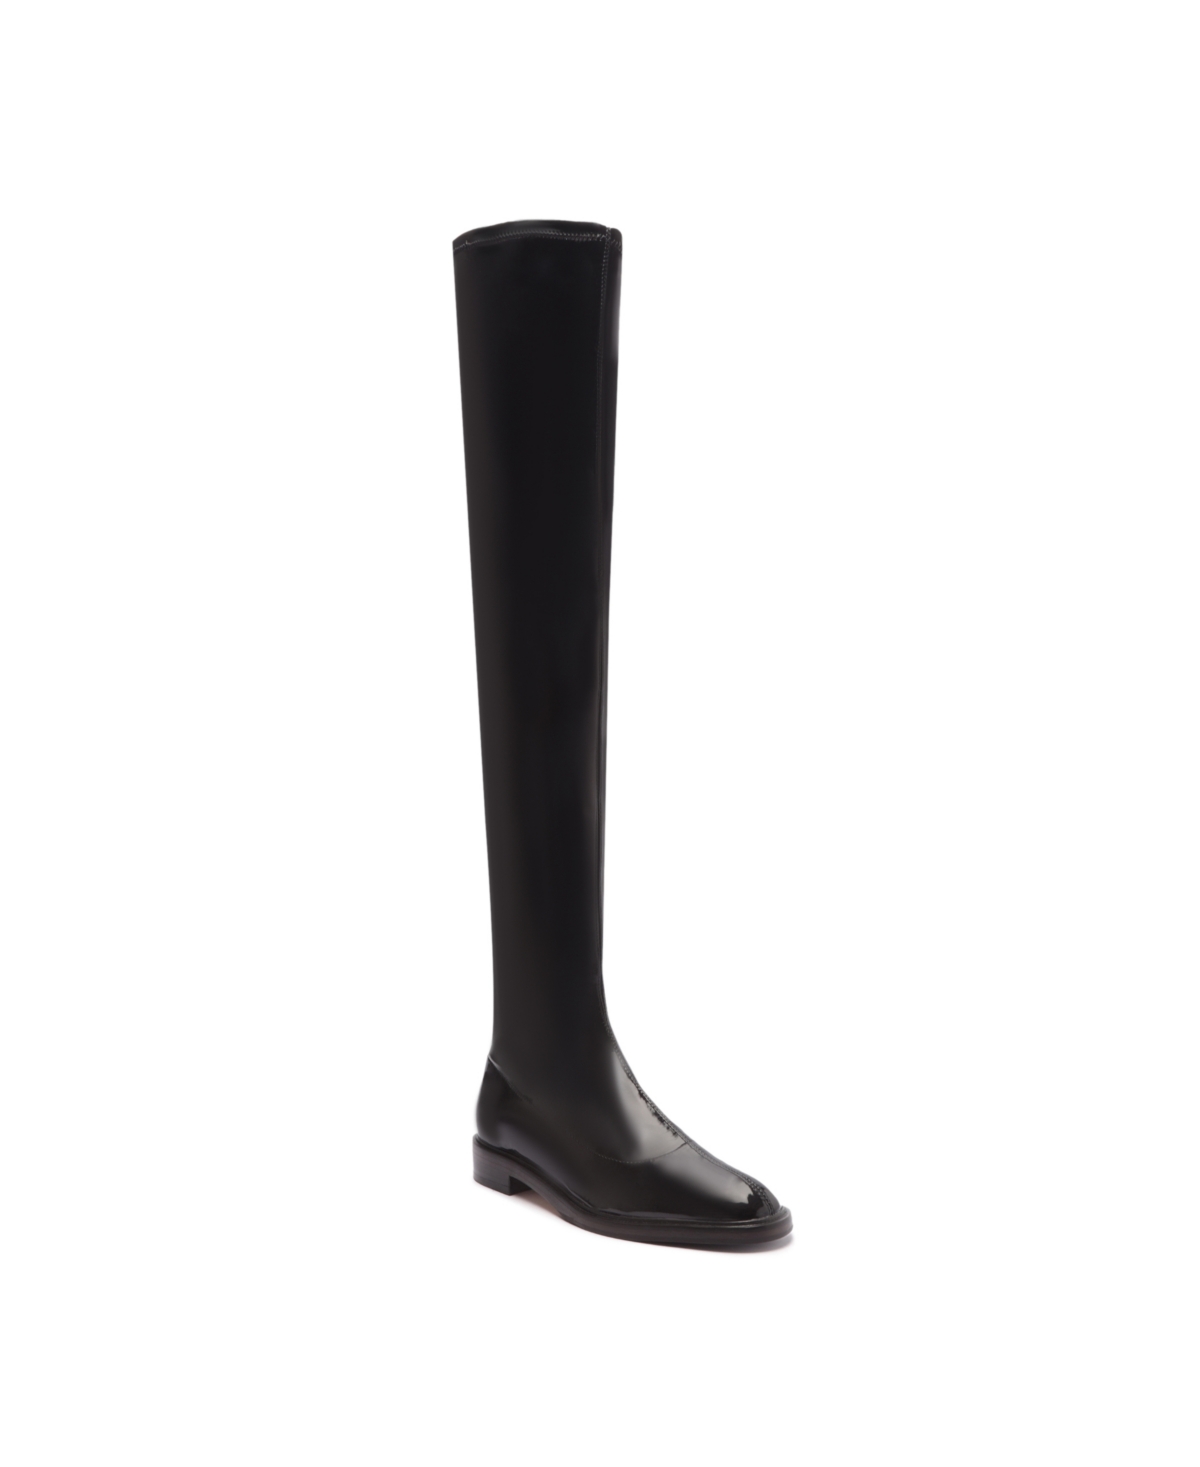 Women's Kaolin Over-The-Knee Flat Boots - Black- Patent